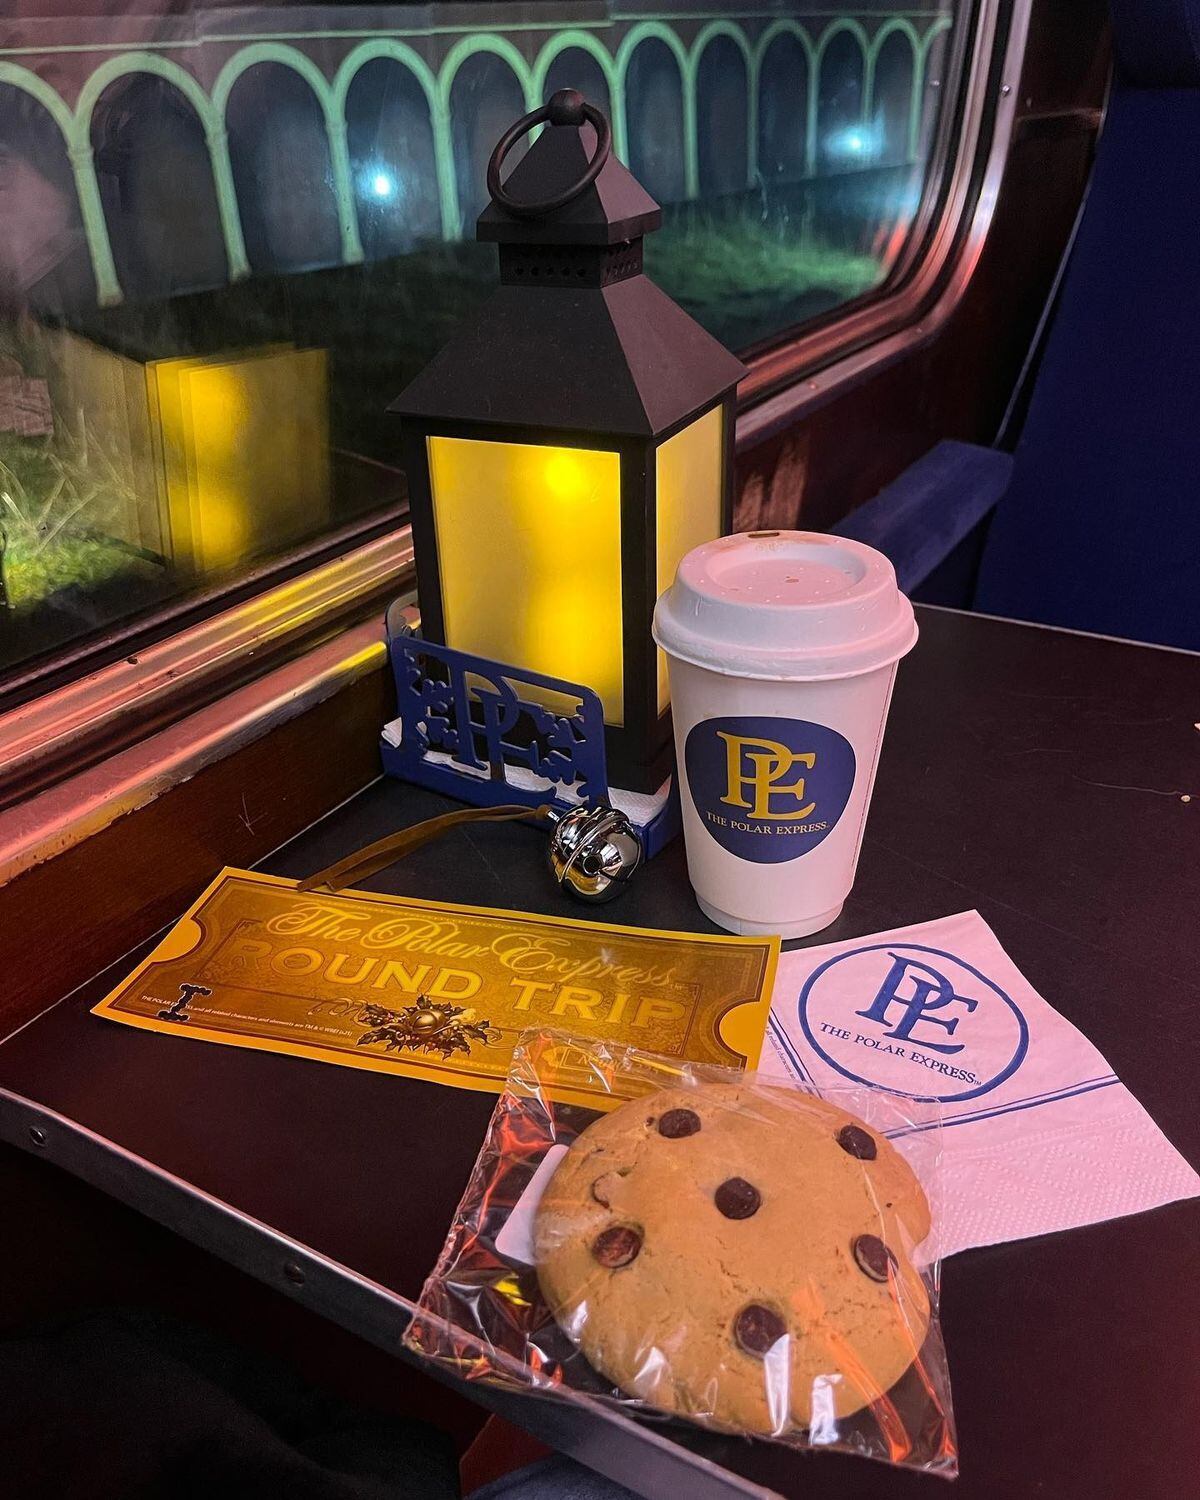 The cookies will be available on the Polar Express 